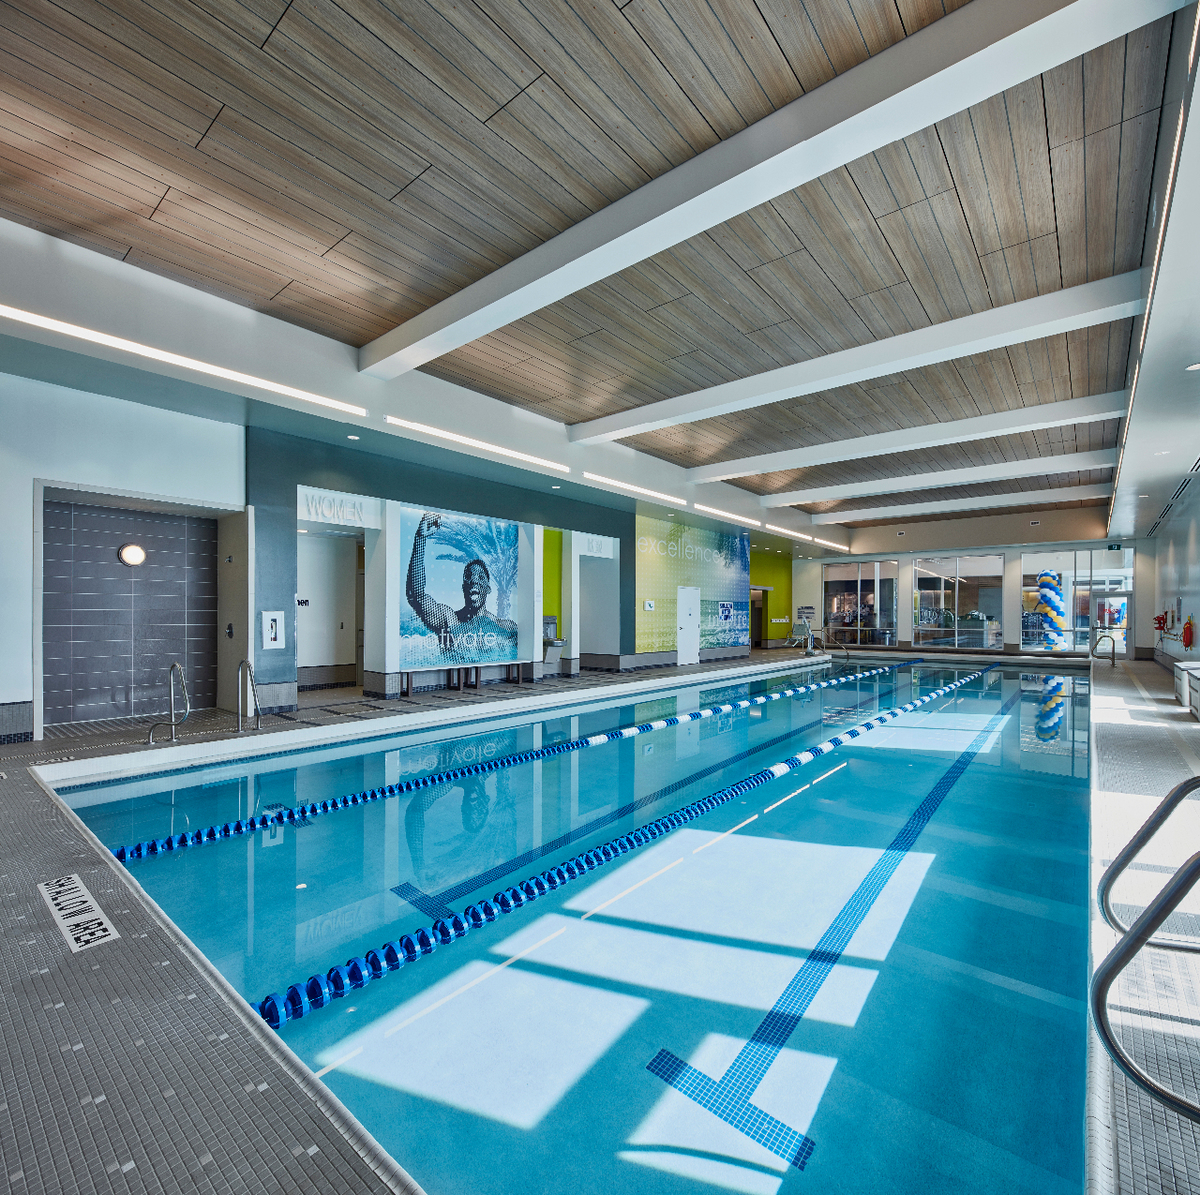 5 Day Do Any Fitness First Gyms Have Swimming Pools for Fat Body